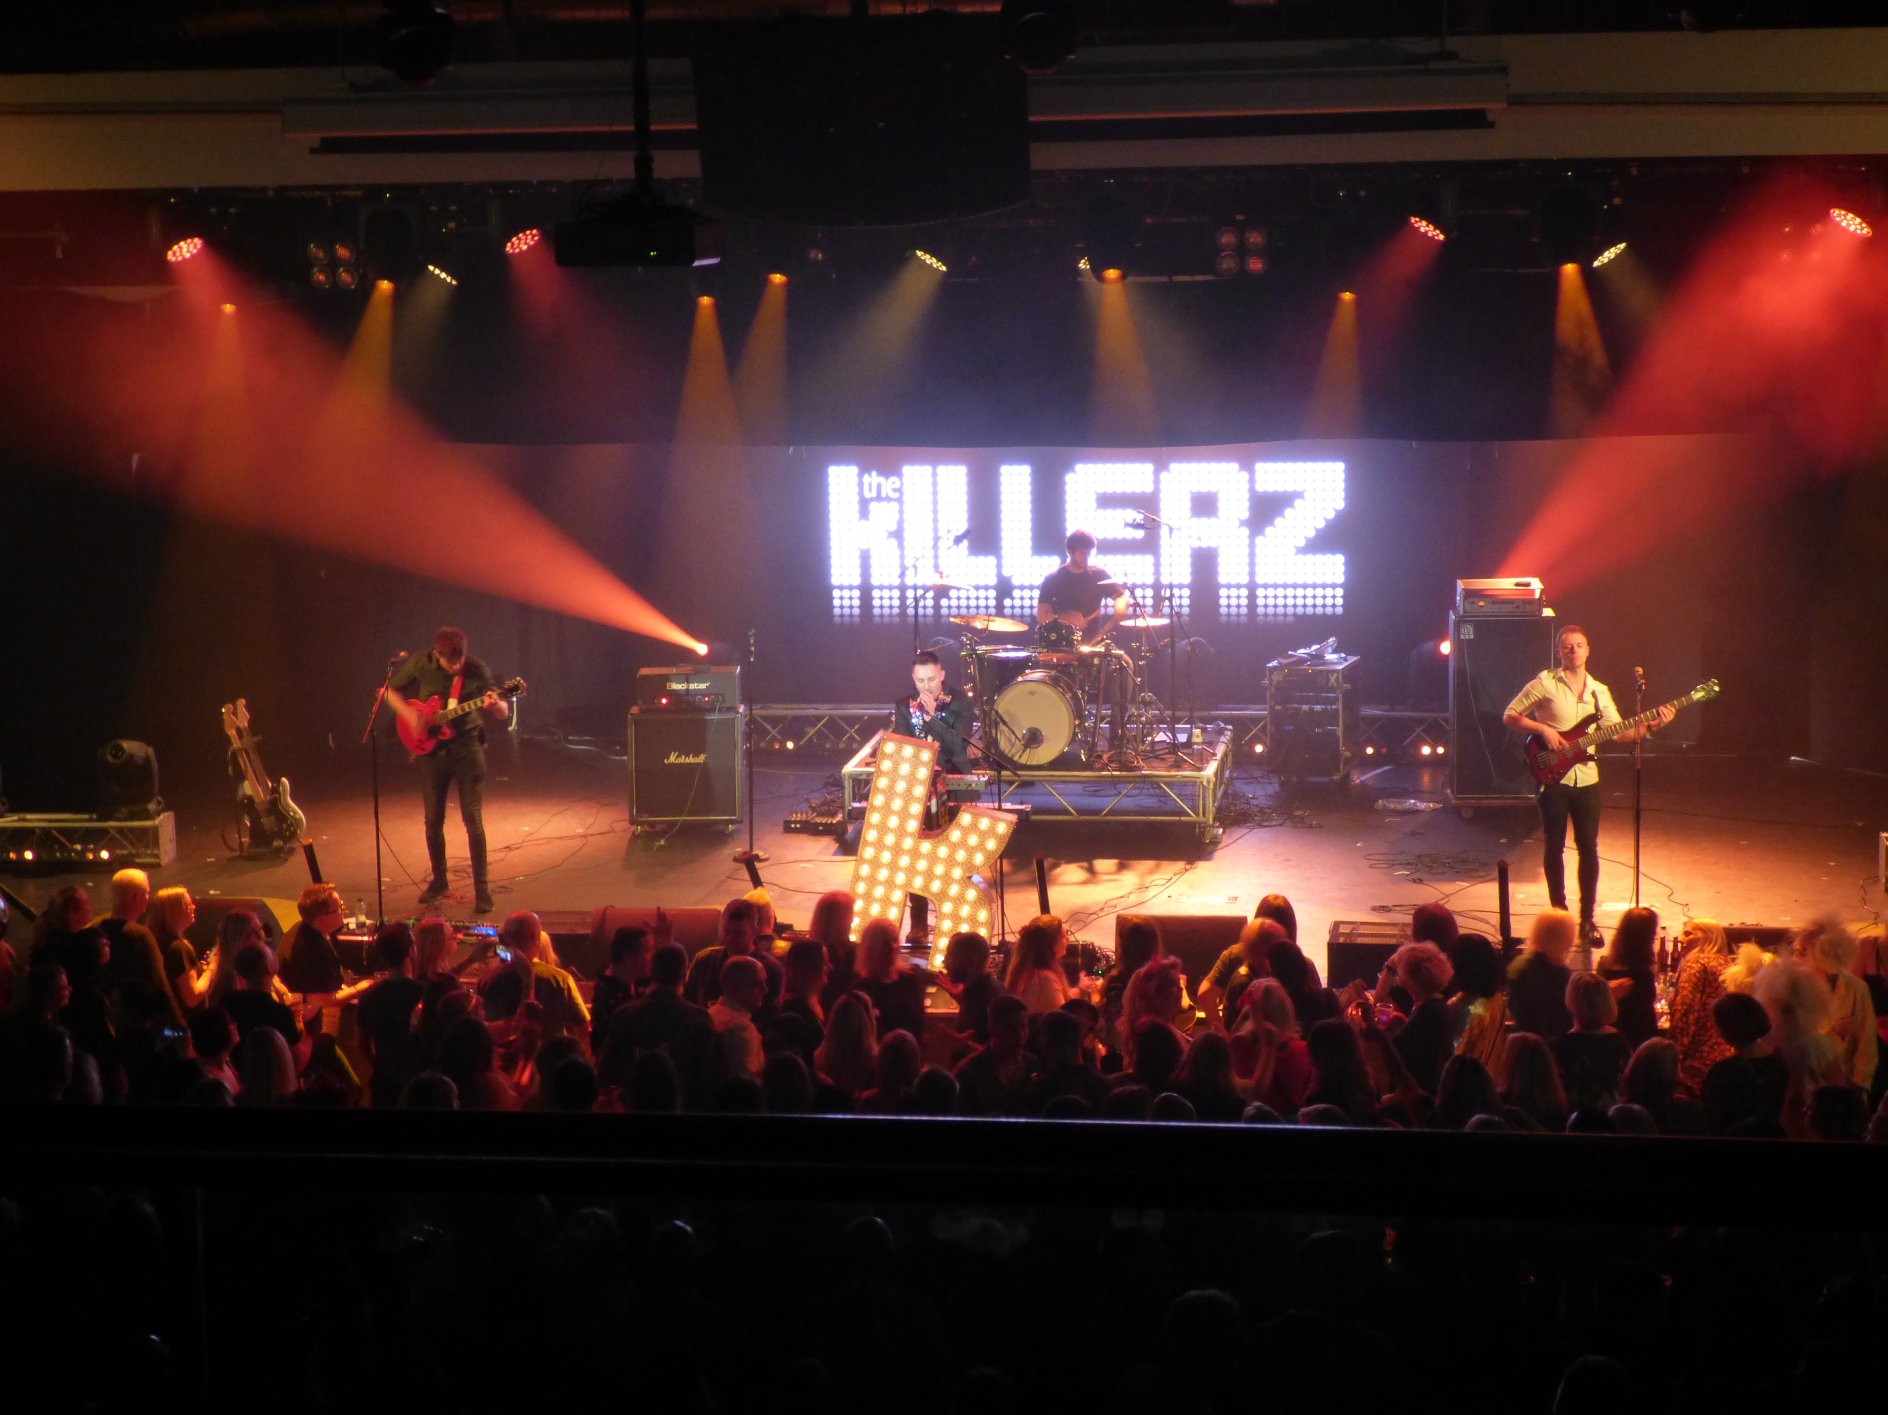 The Killerz - The UK's No 1 Tribute to The Killers